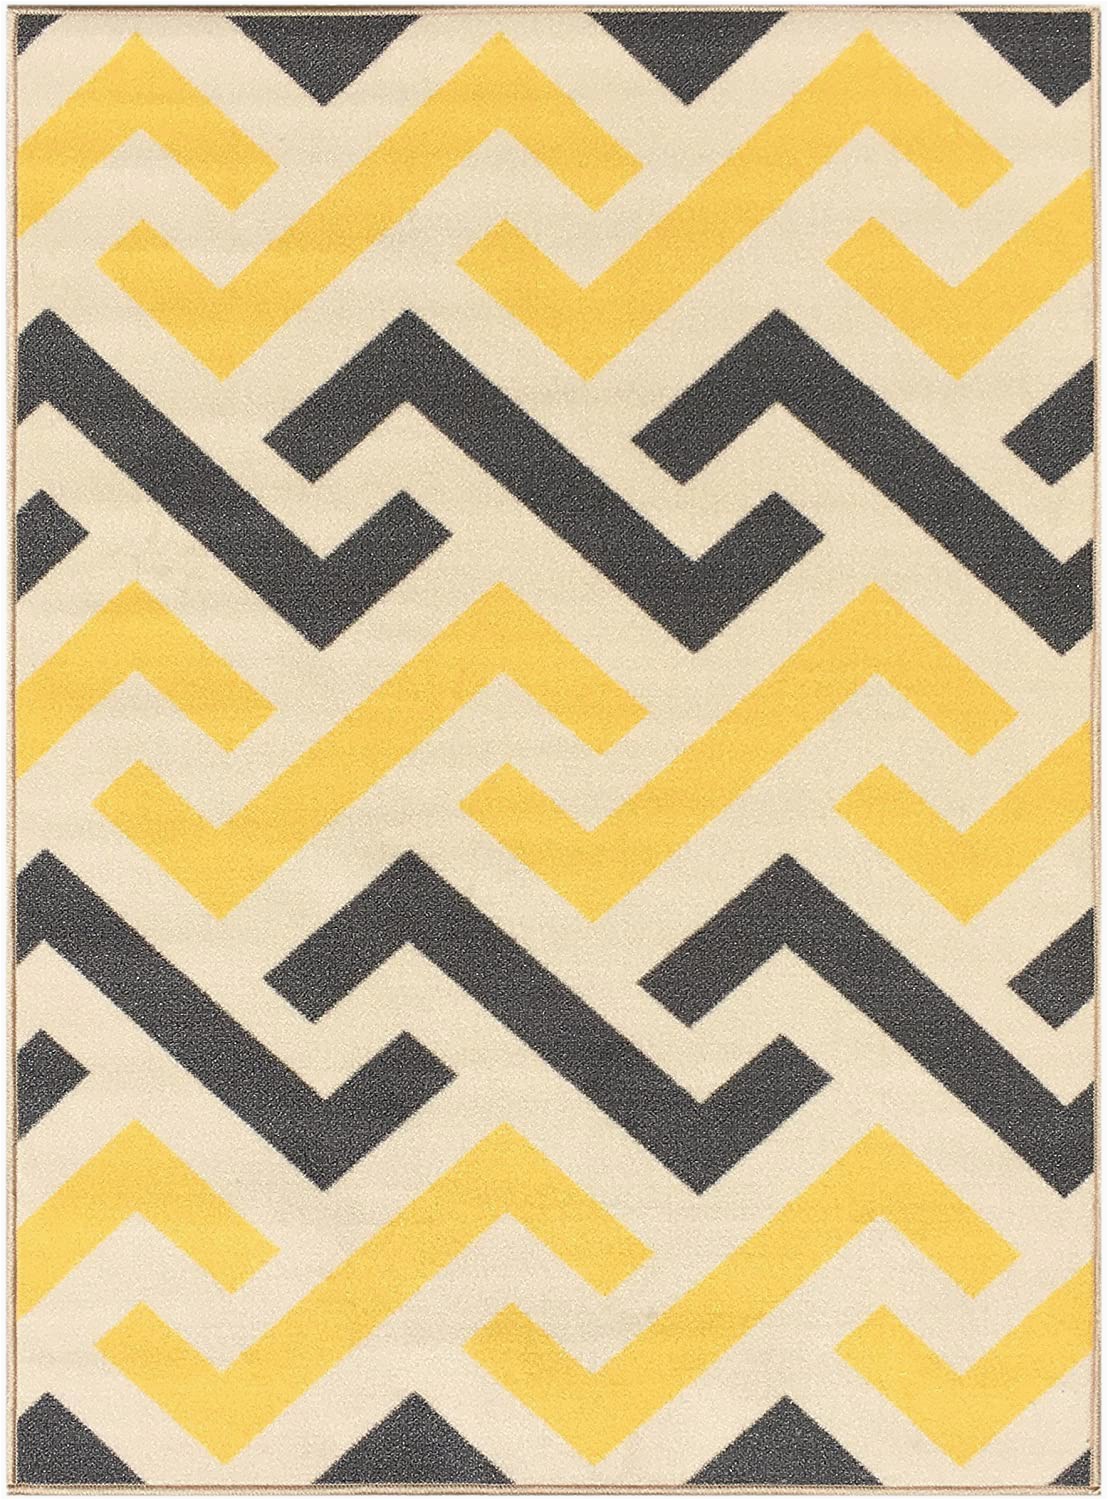 Rubber Backed area Rugs 4×6 Qute Home Rubber Backed Non Skid Non Slip Geometric Design area Rug Beige Grey Yellow